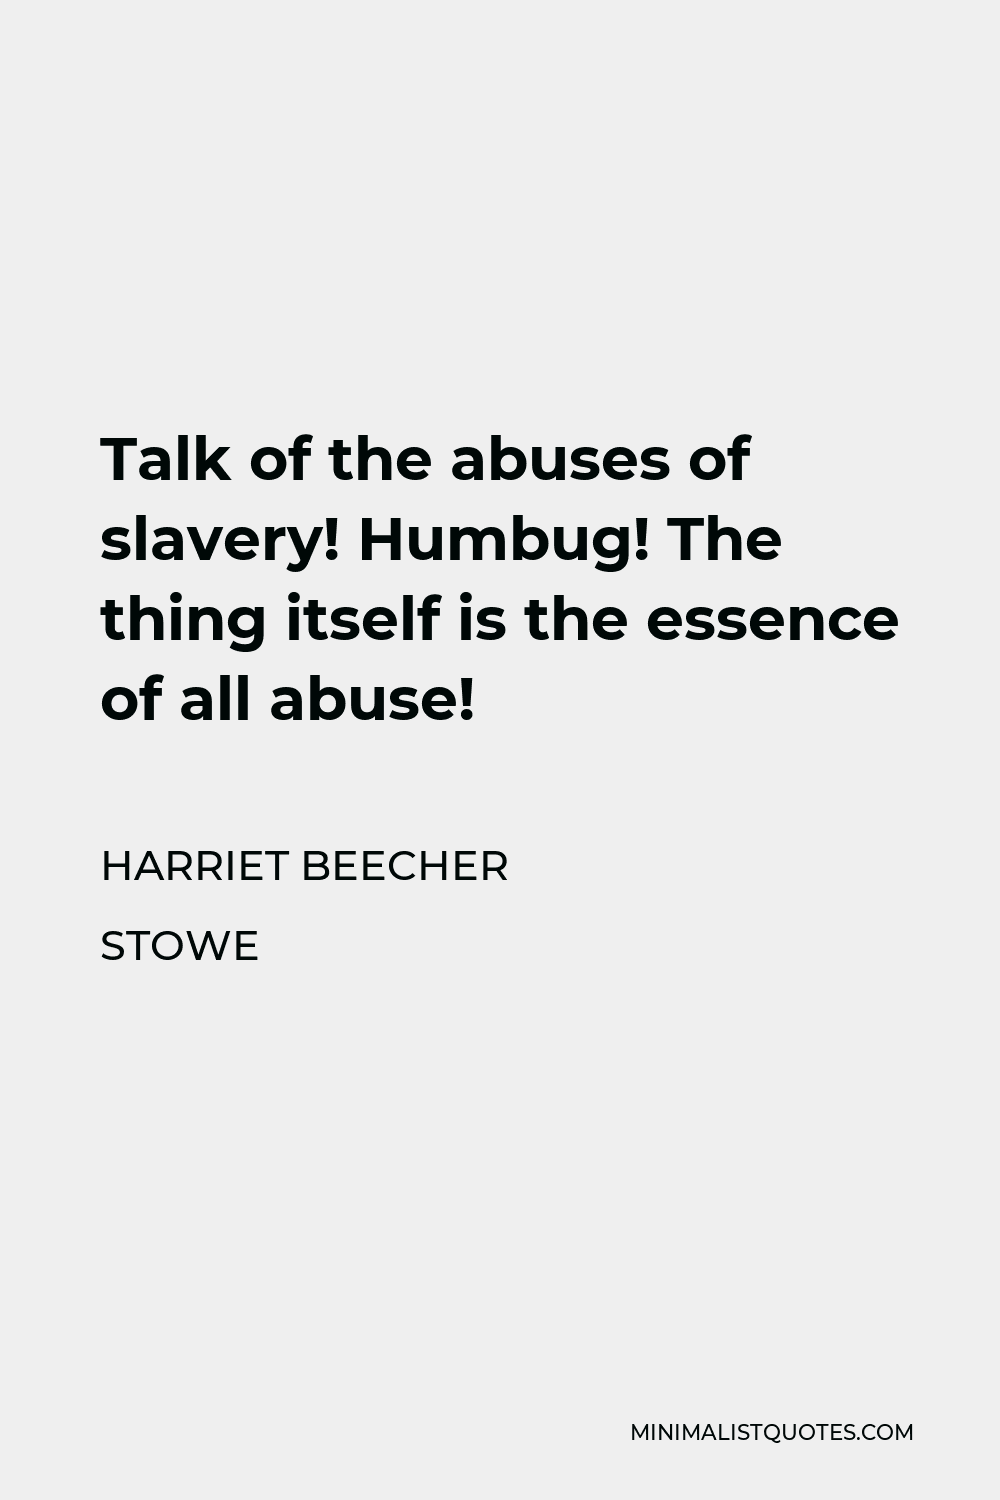 Harriet Beecher Stowe Quote - Talk of the abuses of slavery! Humbug! The thing itself is the essence of all abuse!